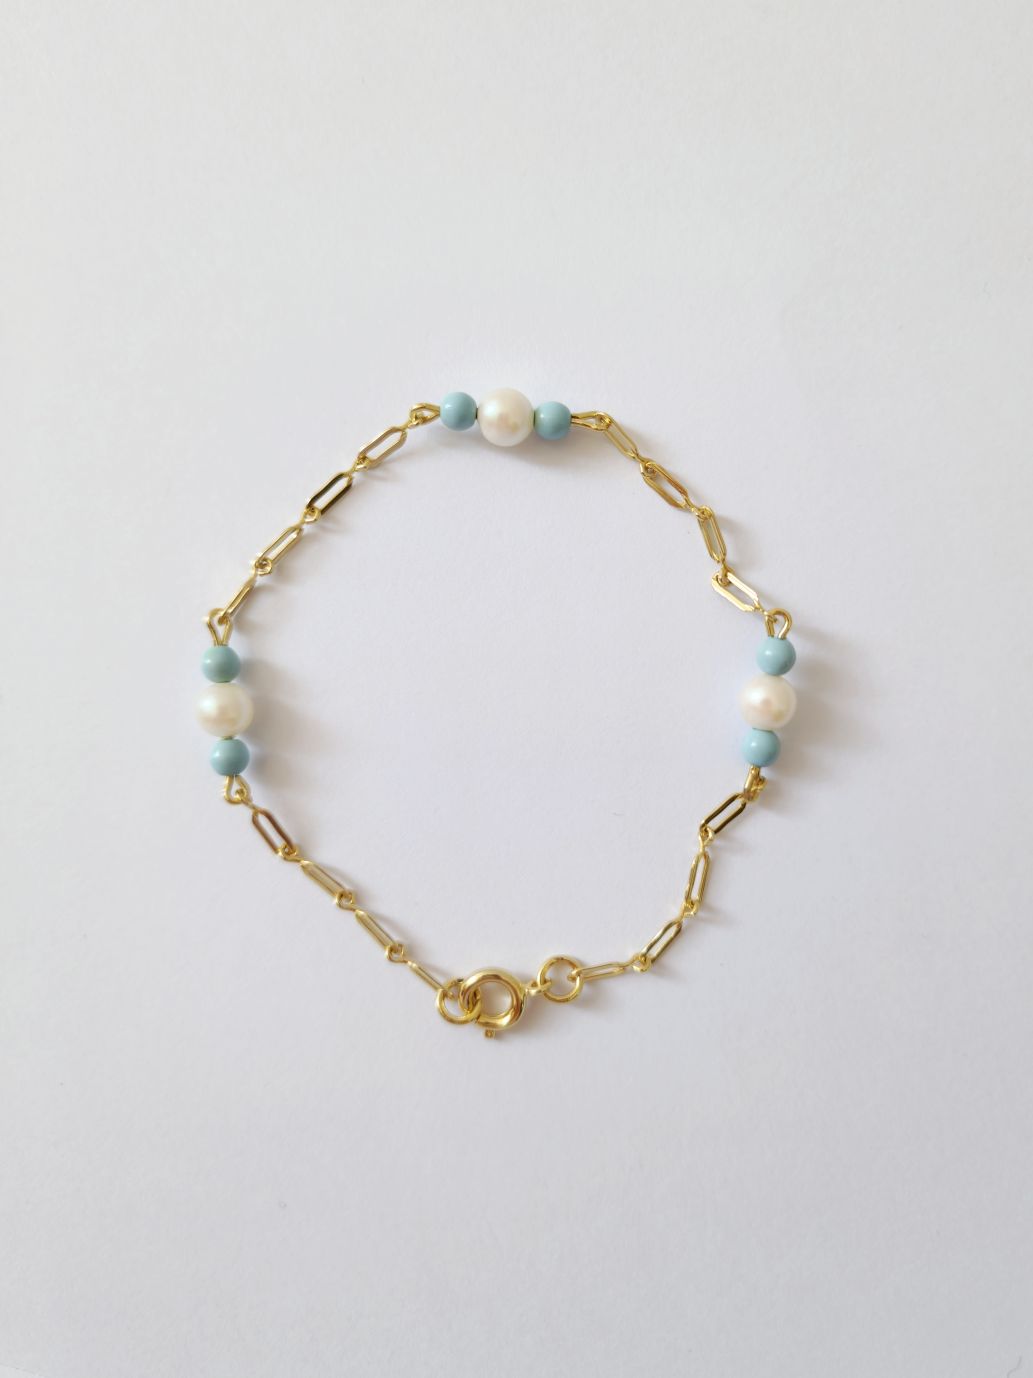 Vintage Gold Plated Paperclip Chain Bracelet with Faux Pearls and Blue Beads